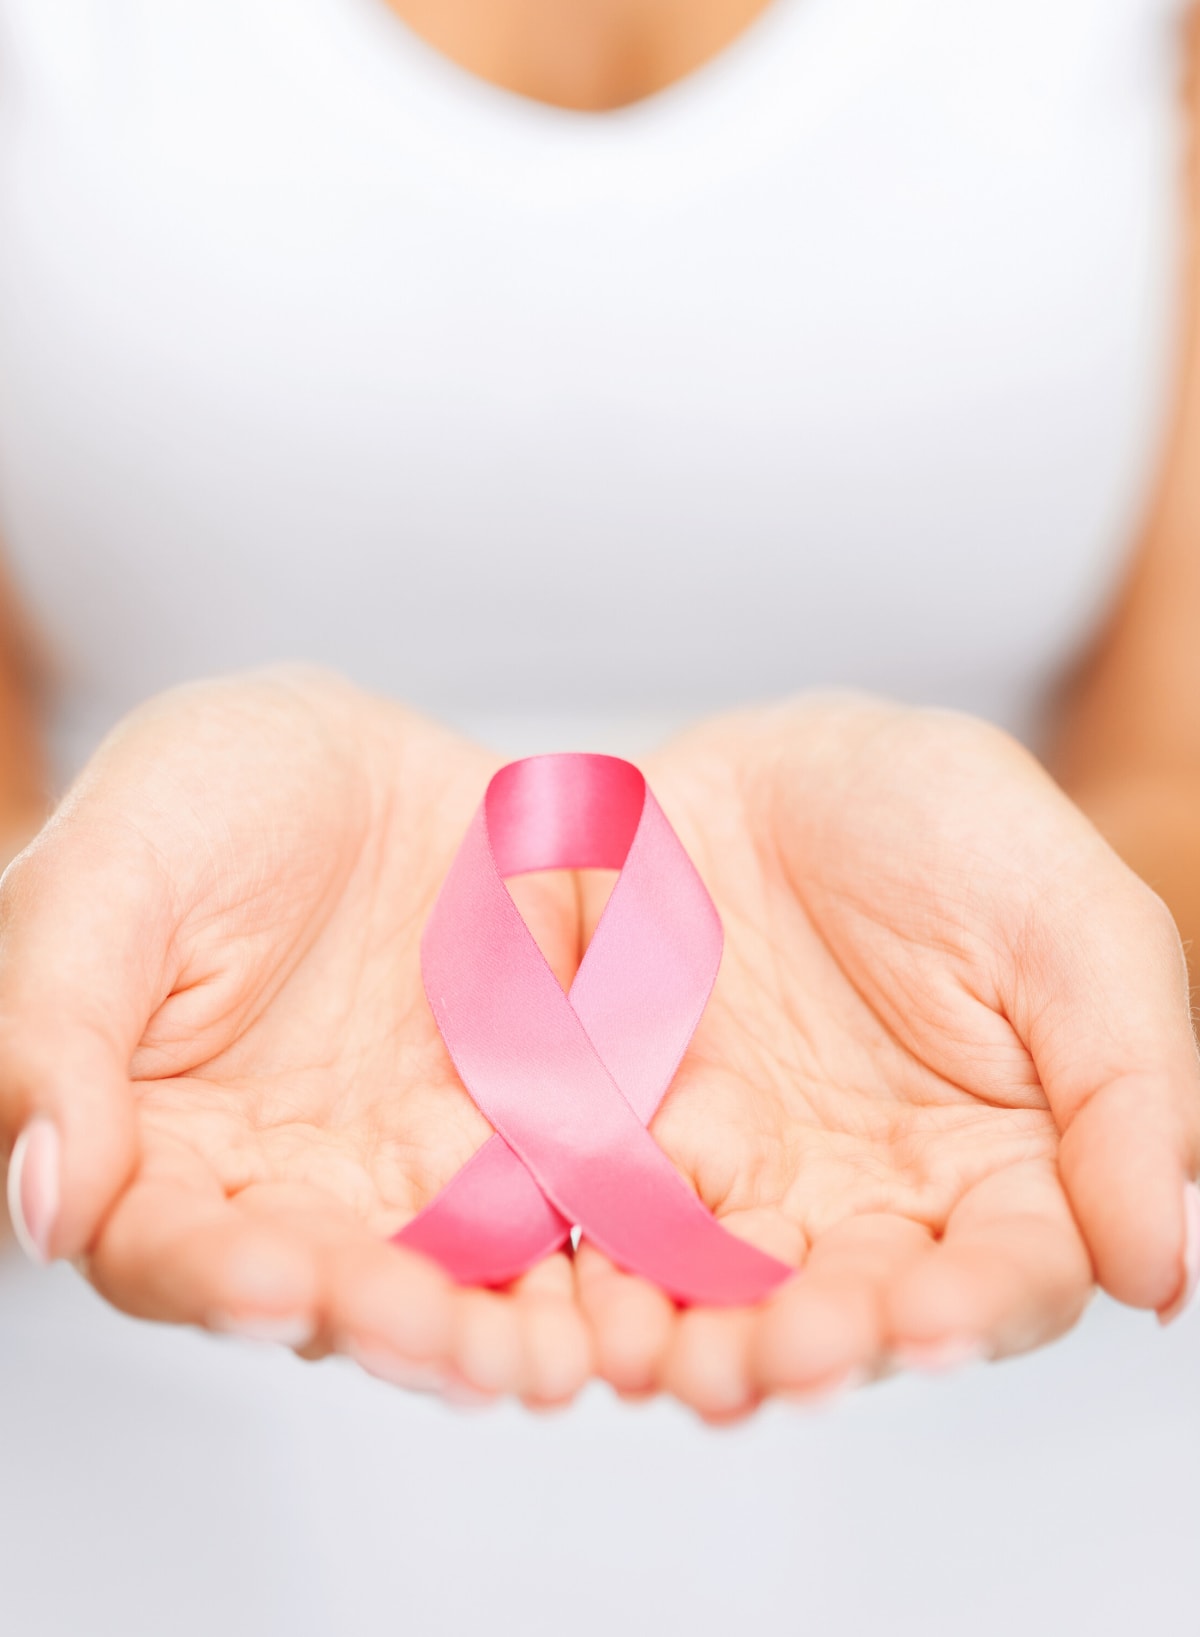 Breast Cancer Awareness Month 2022: What You Should Know